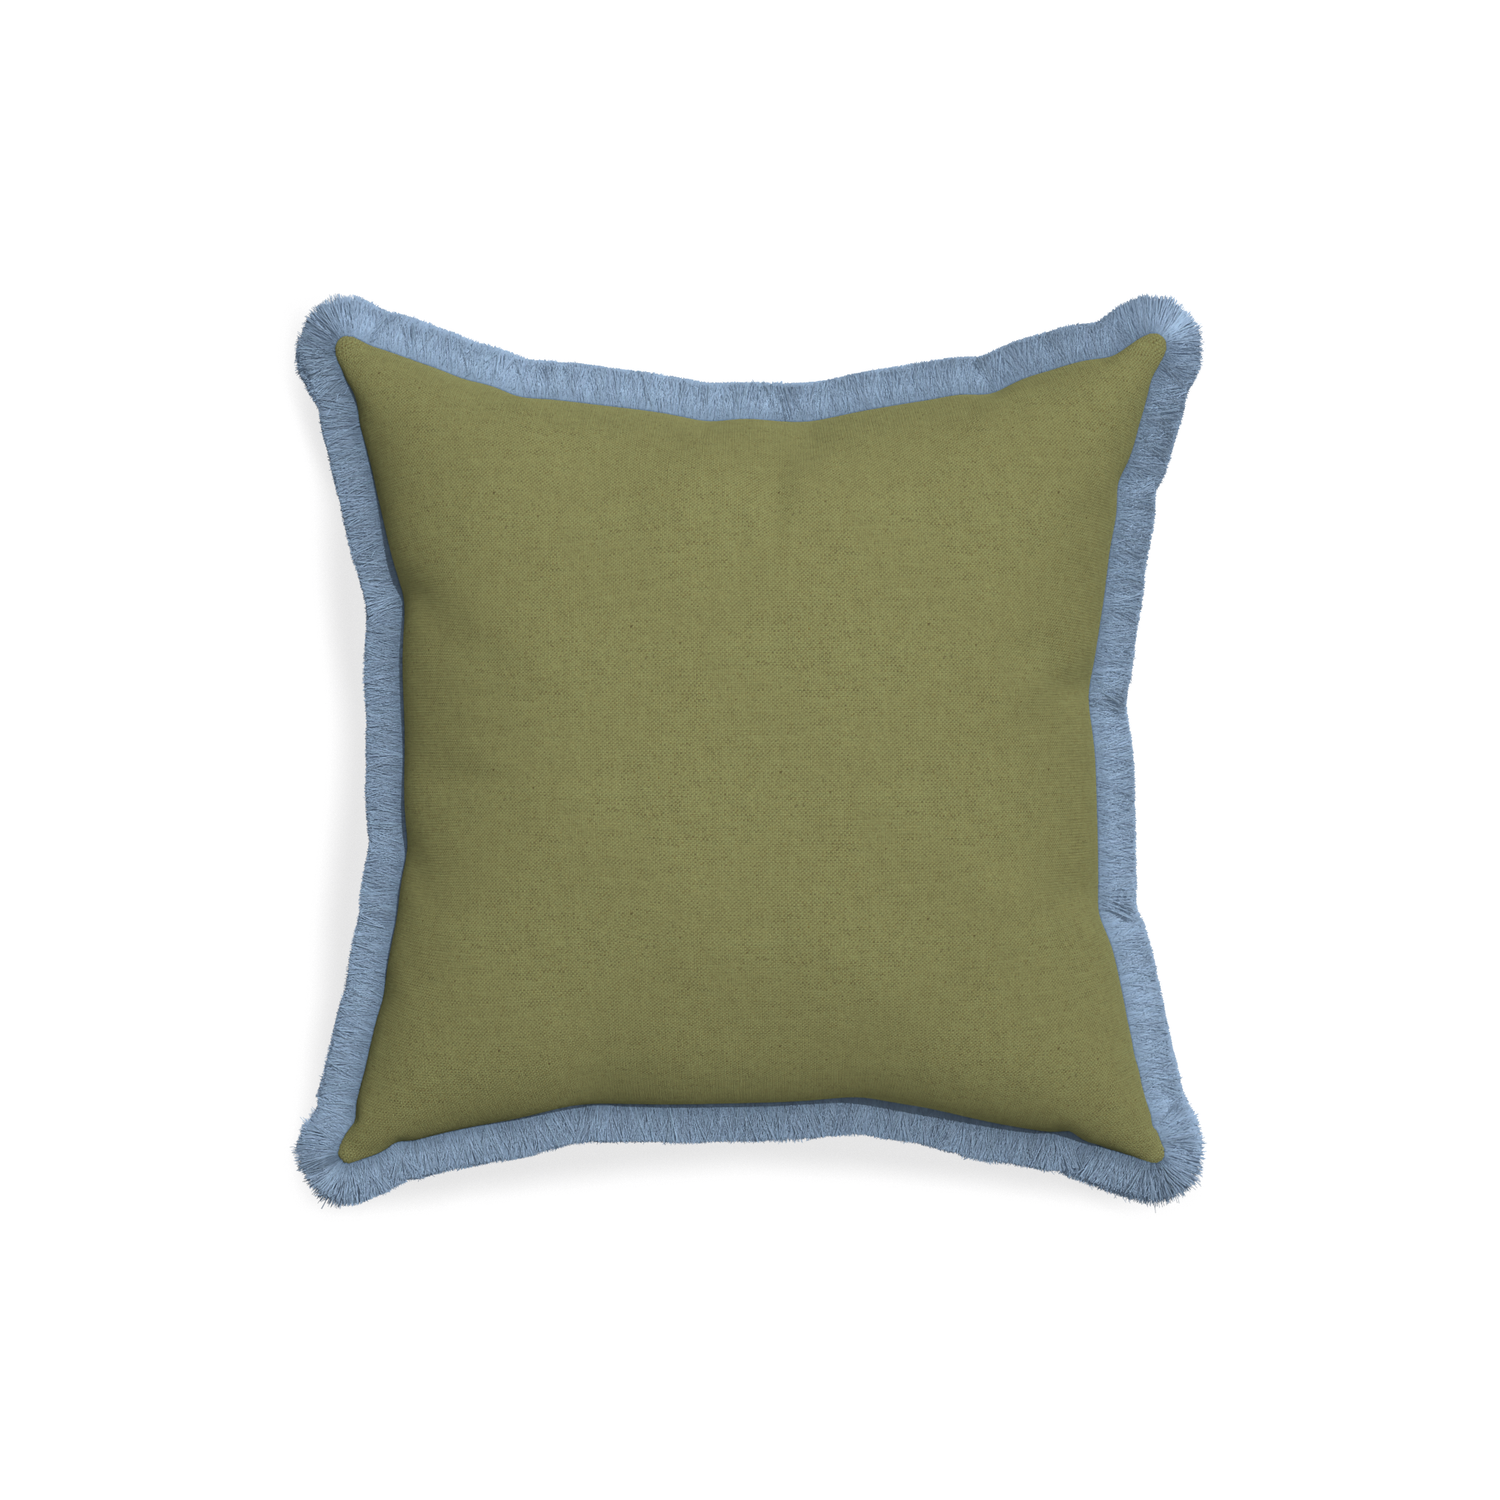 18-square moss custom moss greenpillow with sky fringe on white background